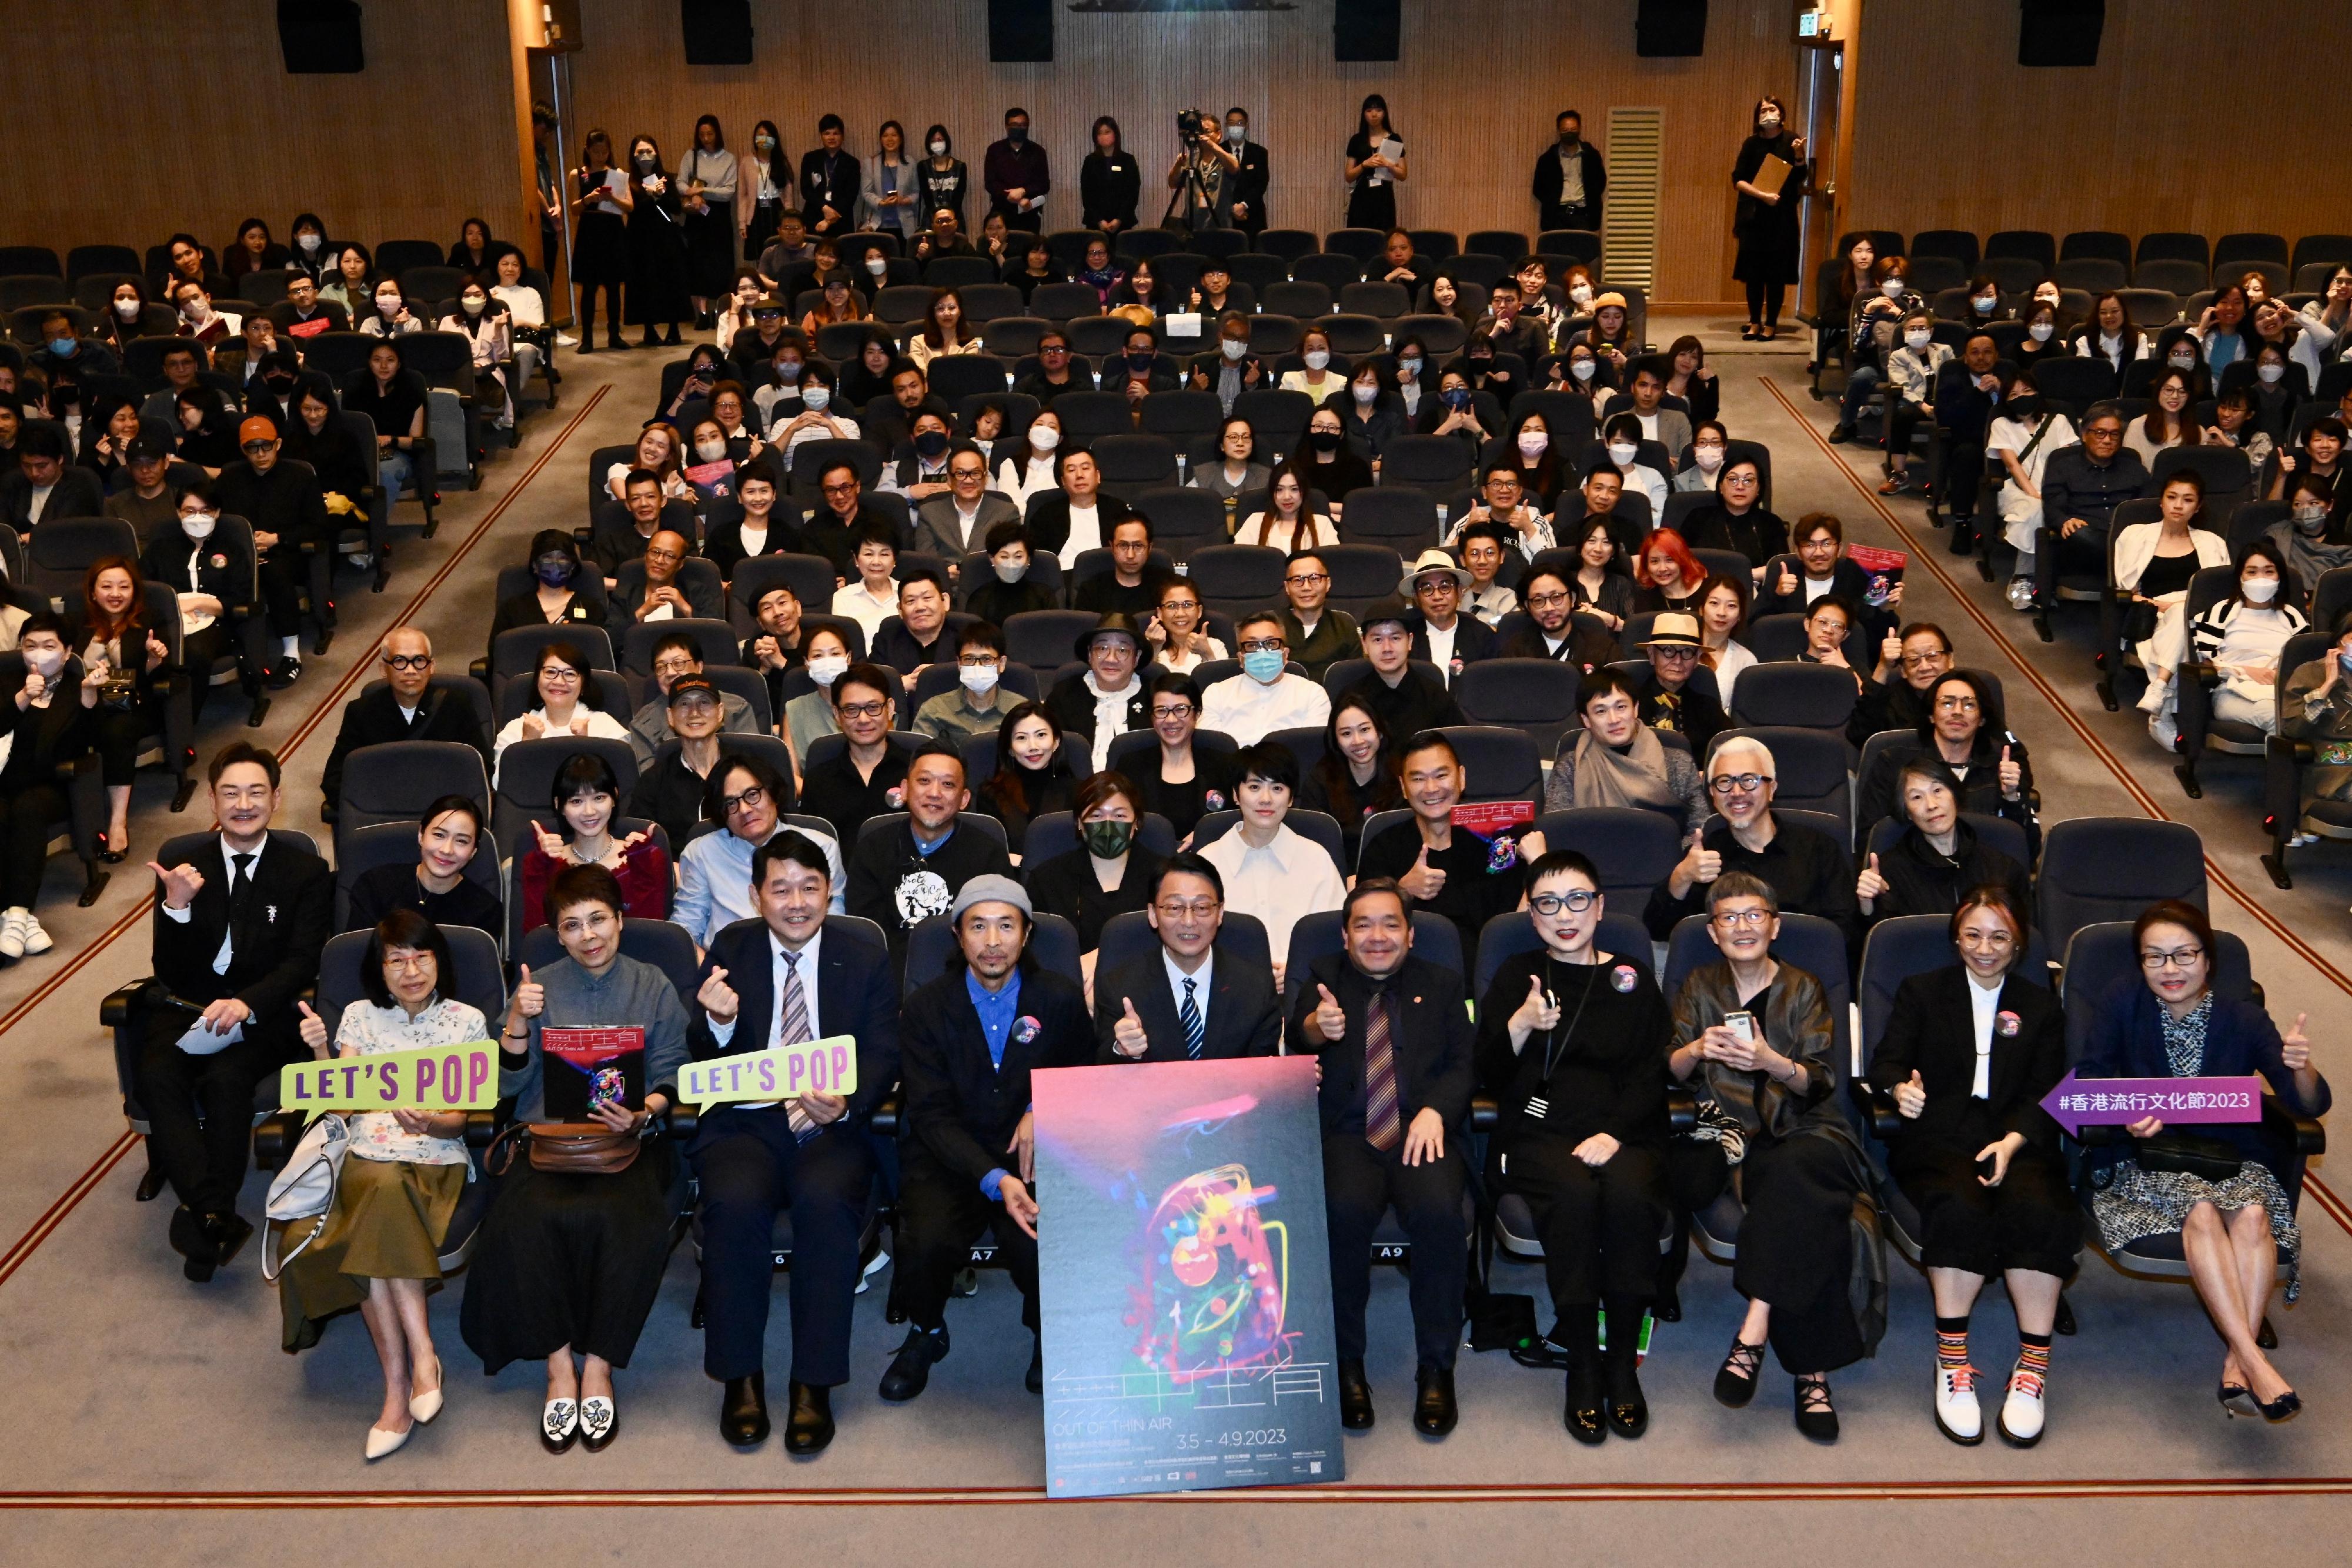 The opening ceremony for the "Out of Thin Air: Hong Kong Film Arts & Costumes Exhibition" was held today (May 2) at the Hong Kong Heritage Museum. Photo shows guests at the ceremony.